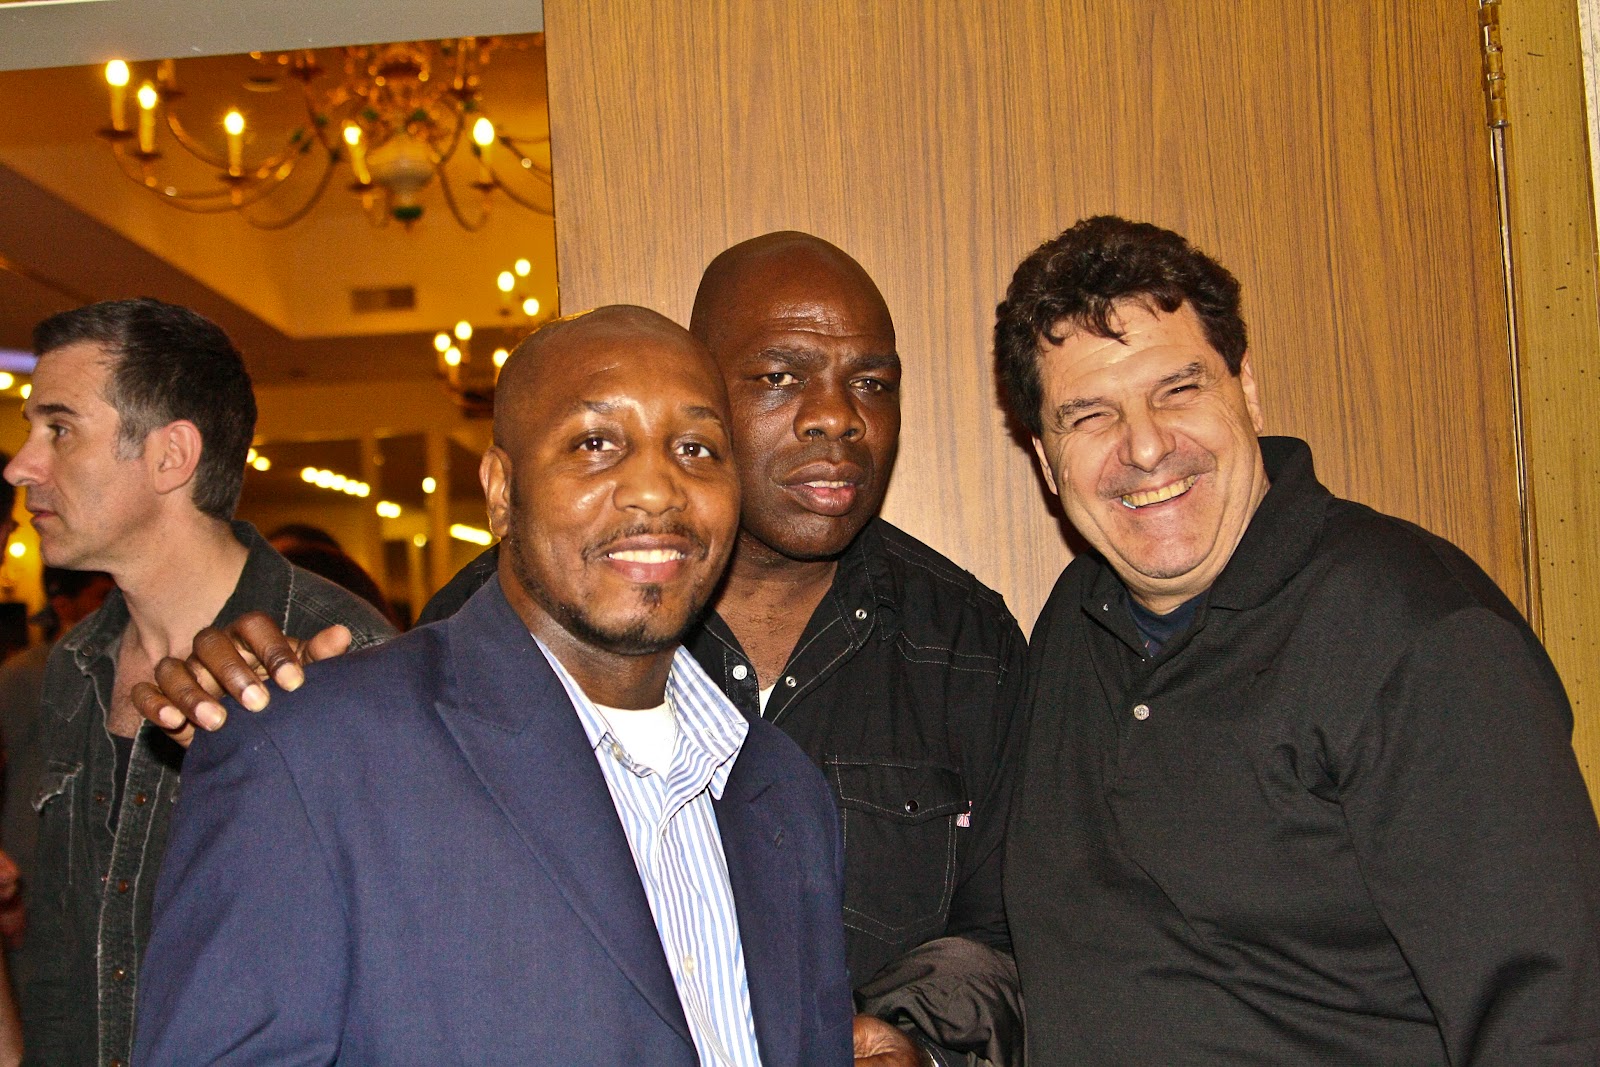 Professional Boxer Junior Jones (former world champion at bantamweight and super bantamweight), professional boxer Iran Barkley (formerly held world titles at middle weight and light heavyweight) and Rich Rossi